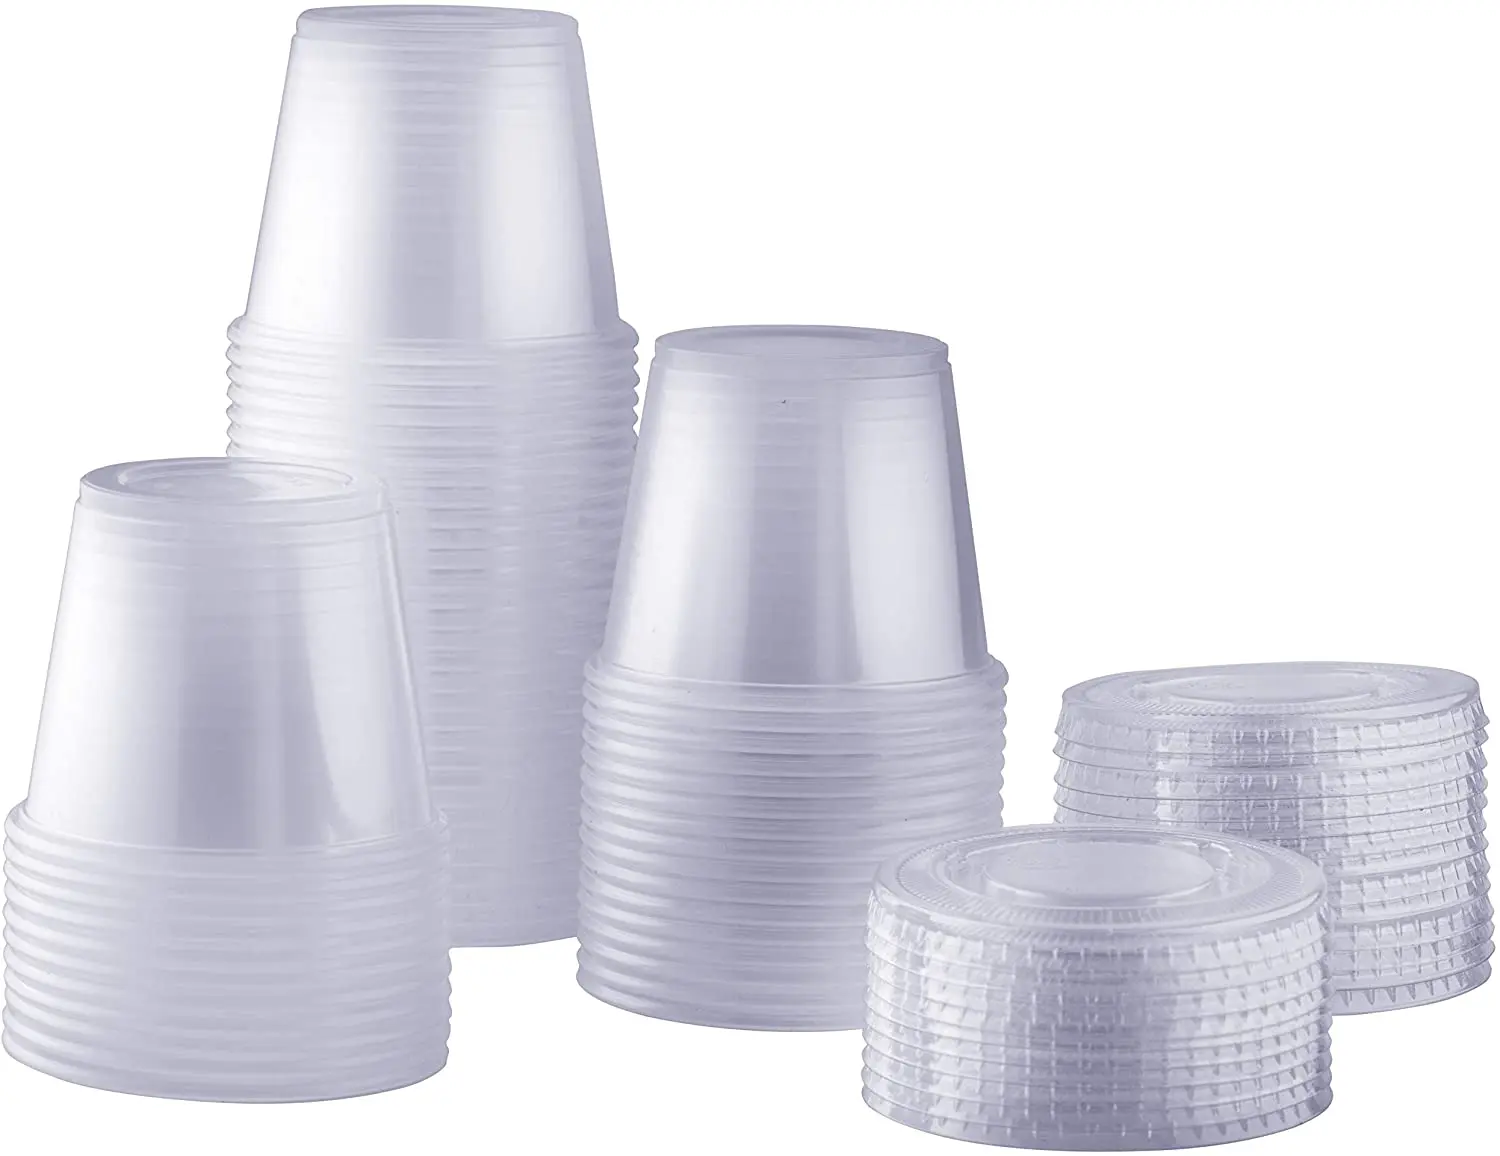  5 Oz Plastic Cups With Lids